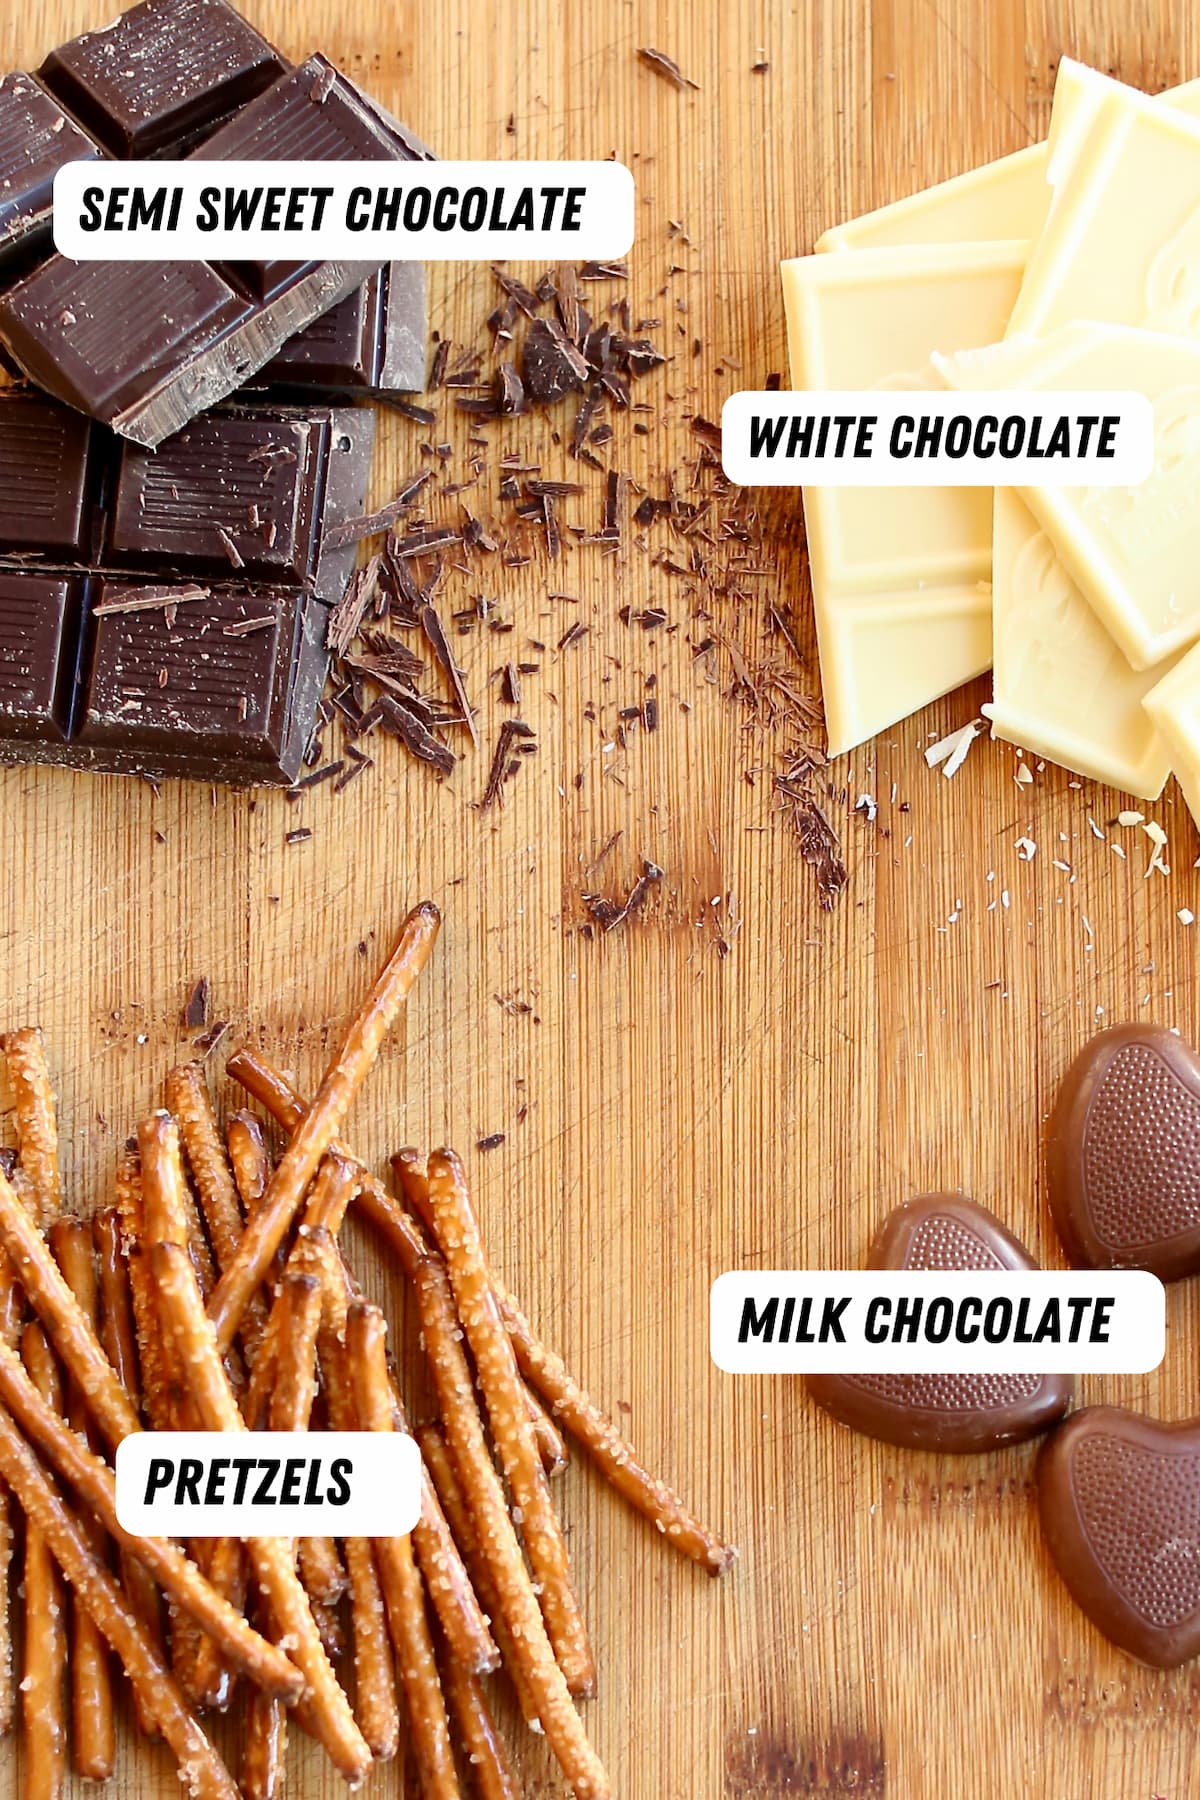 ingredients for chocolate bark and pretzels.